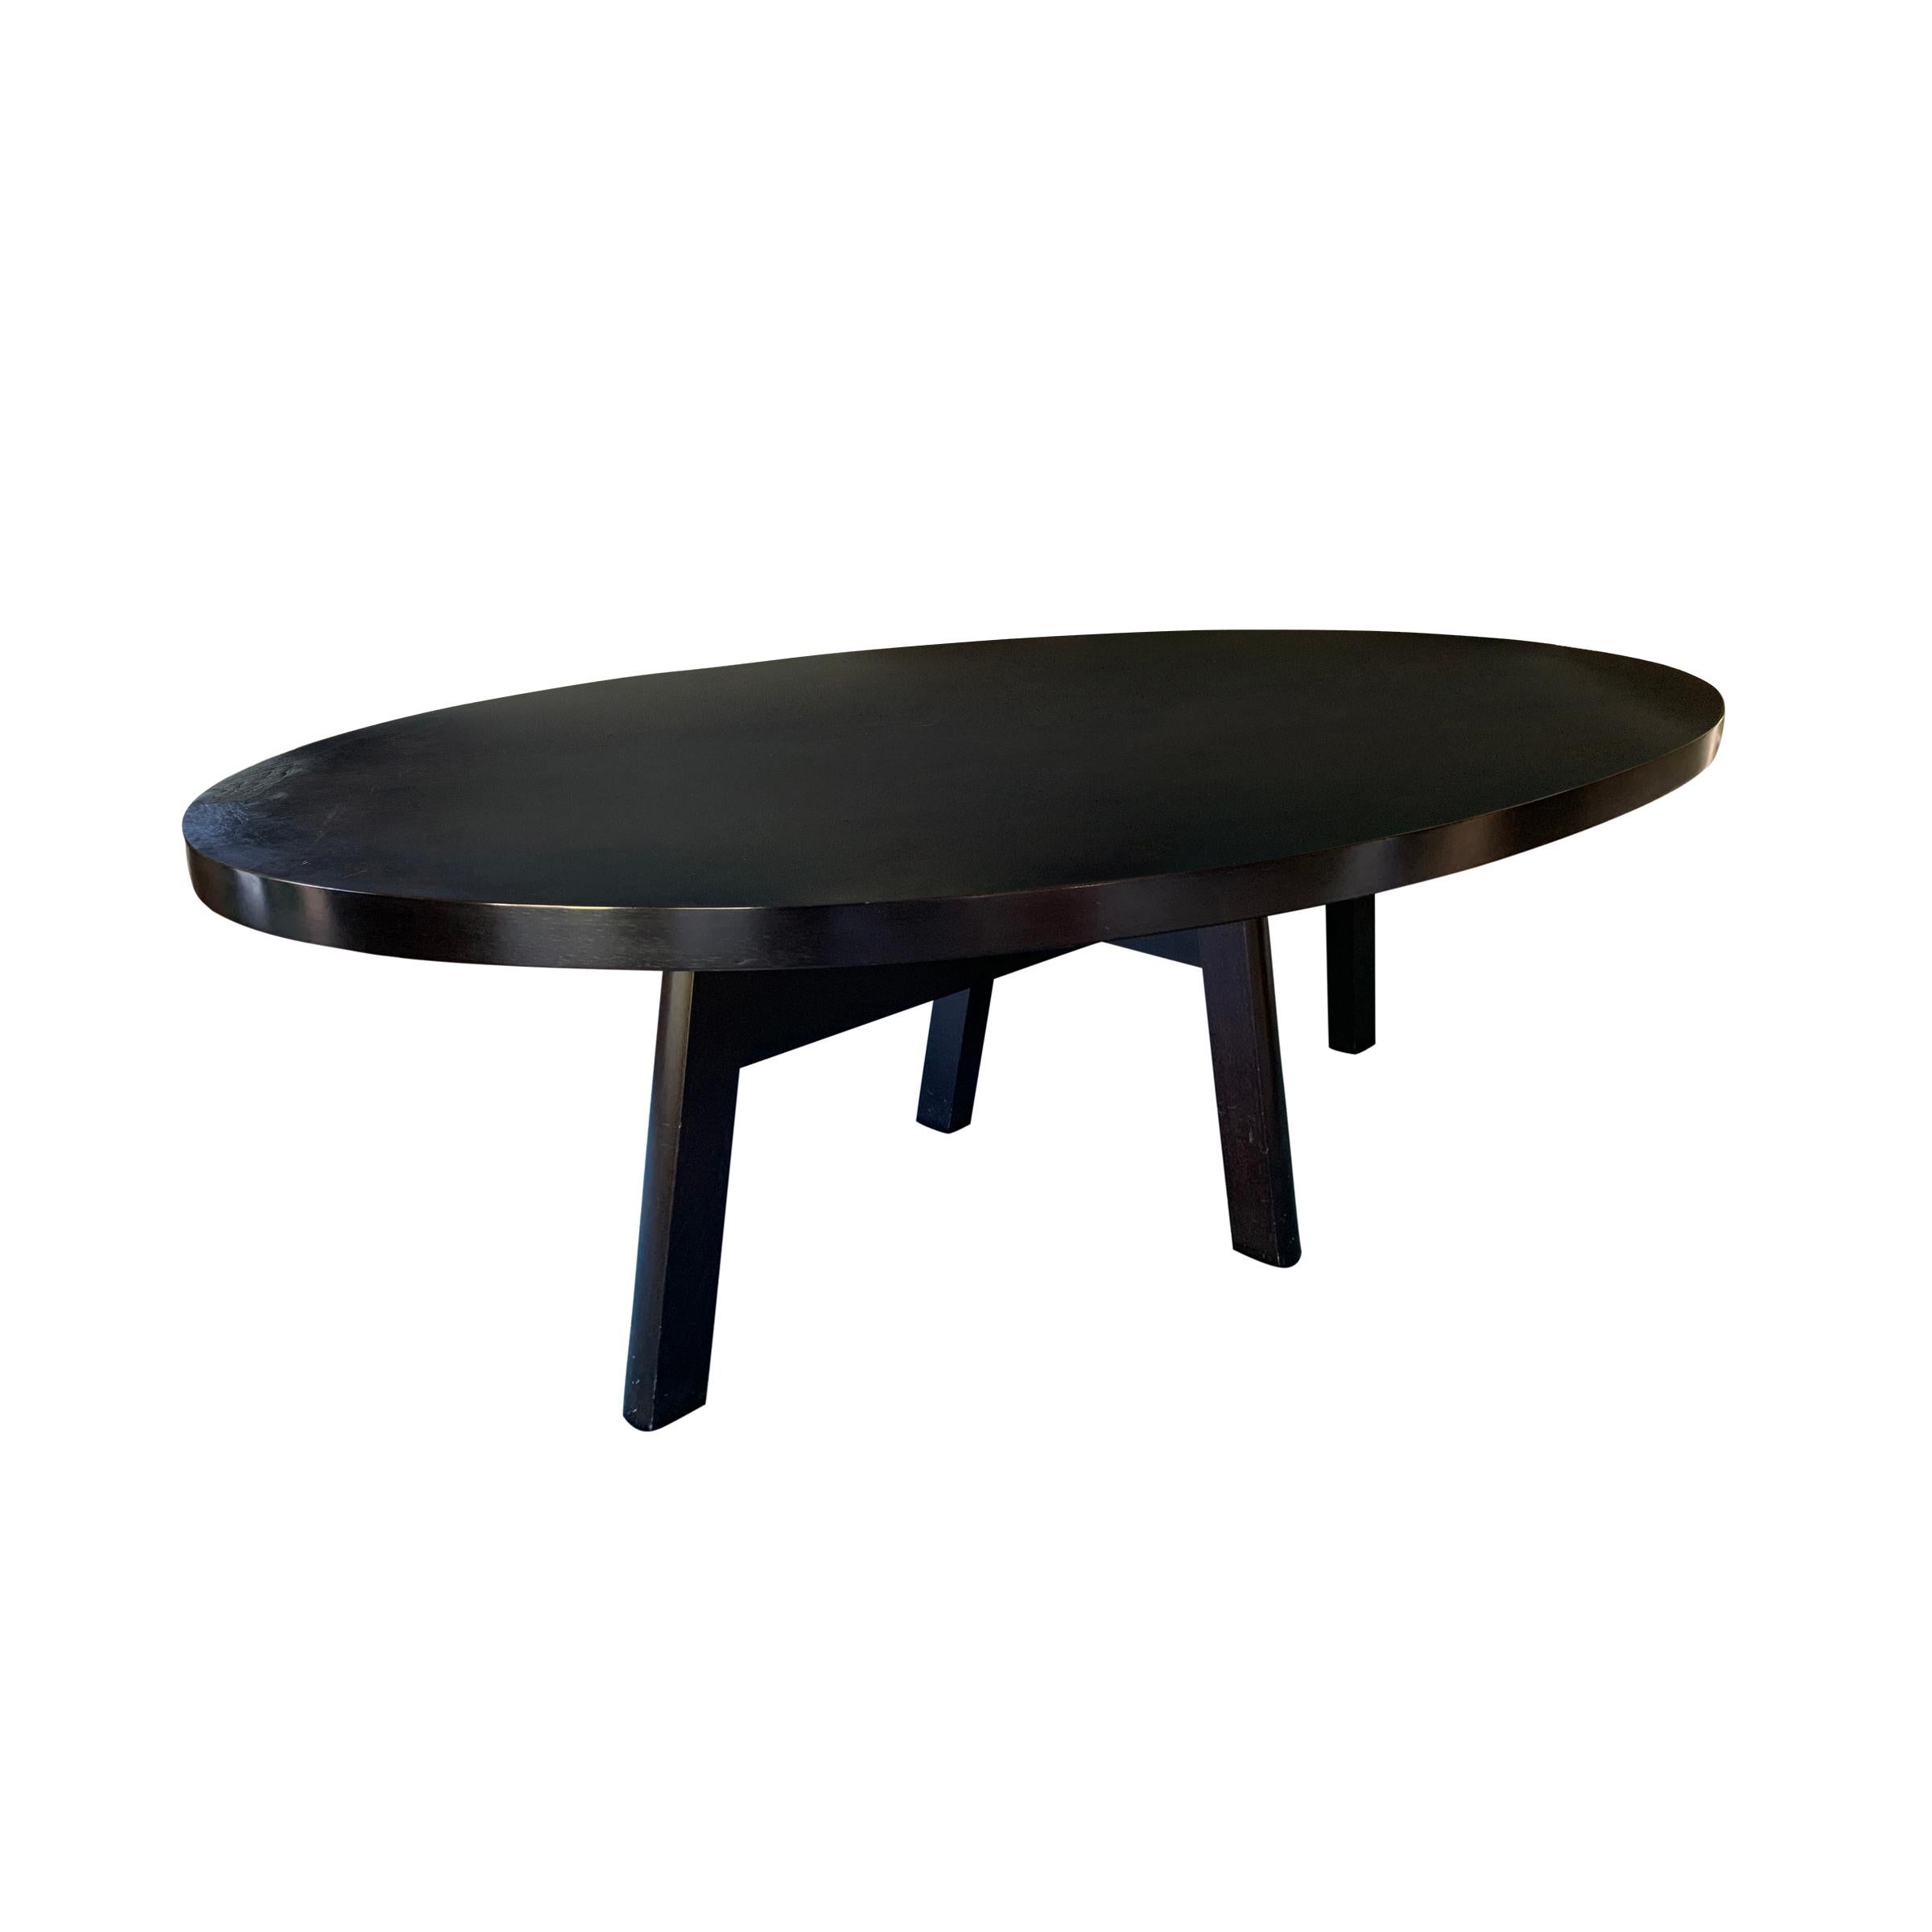 American Christian Liaigre Designed Oval Dining Table